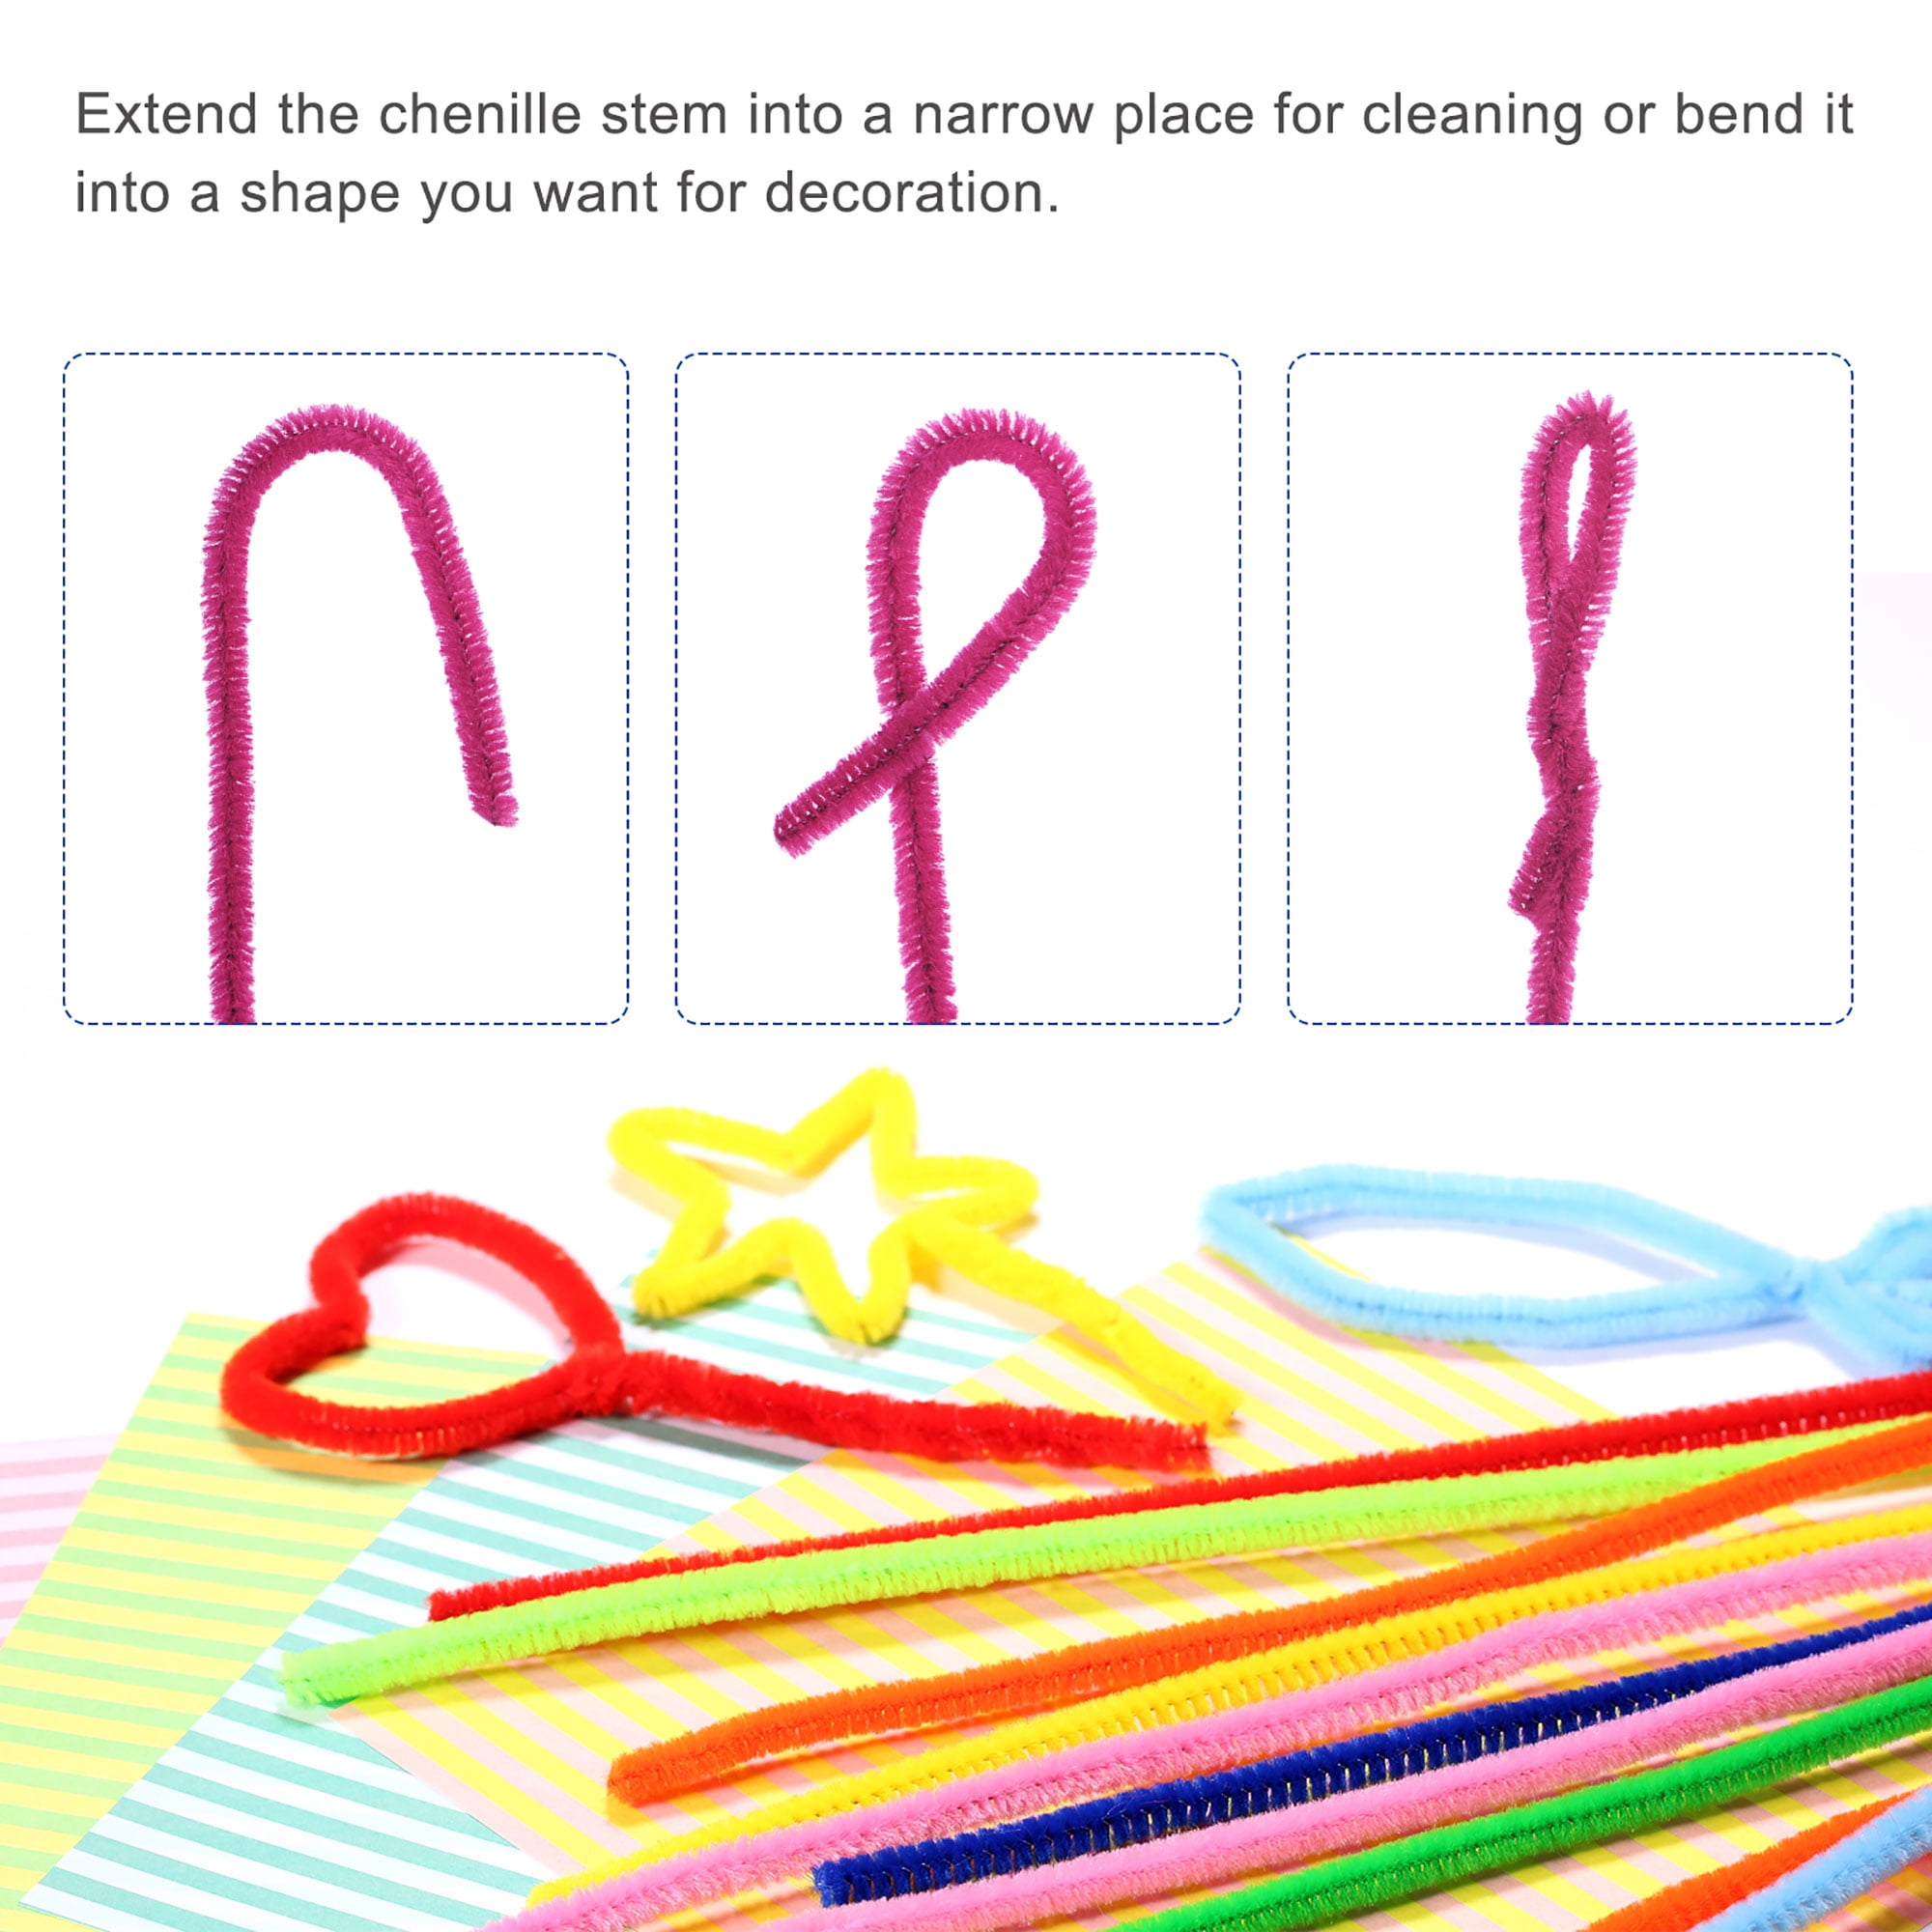 30cm Pink Chenille Craft Stems, Long Pipe Cleaners, Craft Box Essential,  Kid's Crafts, Versatile Craft Supplies, Flexible, 10/20/40 Pieces 